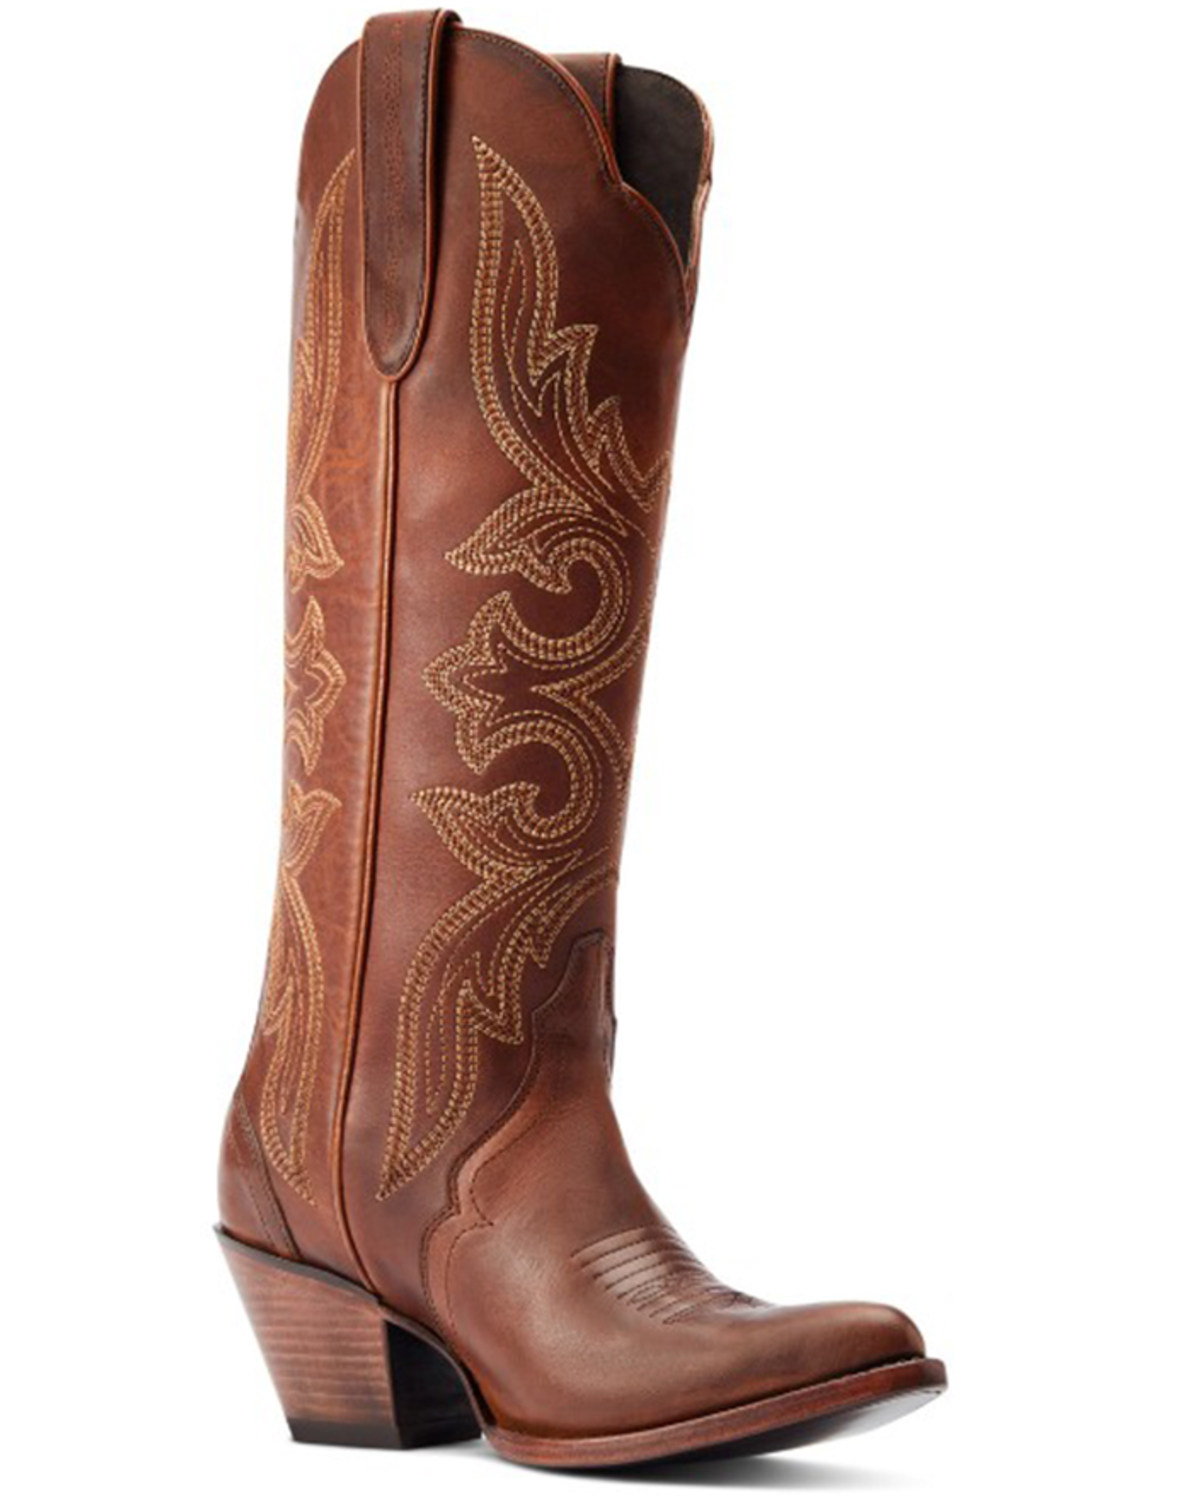 Ariat Women's Belinda StretchFit Tall Western Boots - Pointed Toe